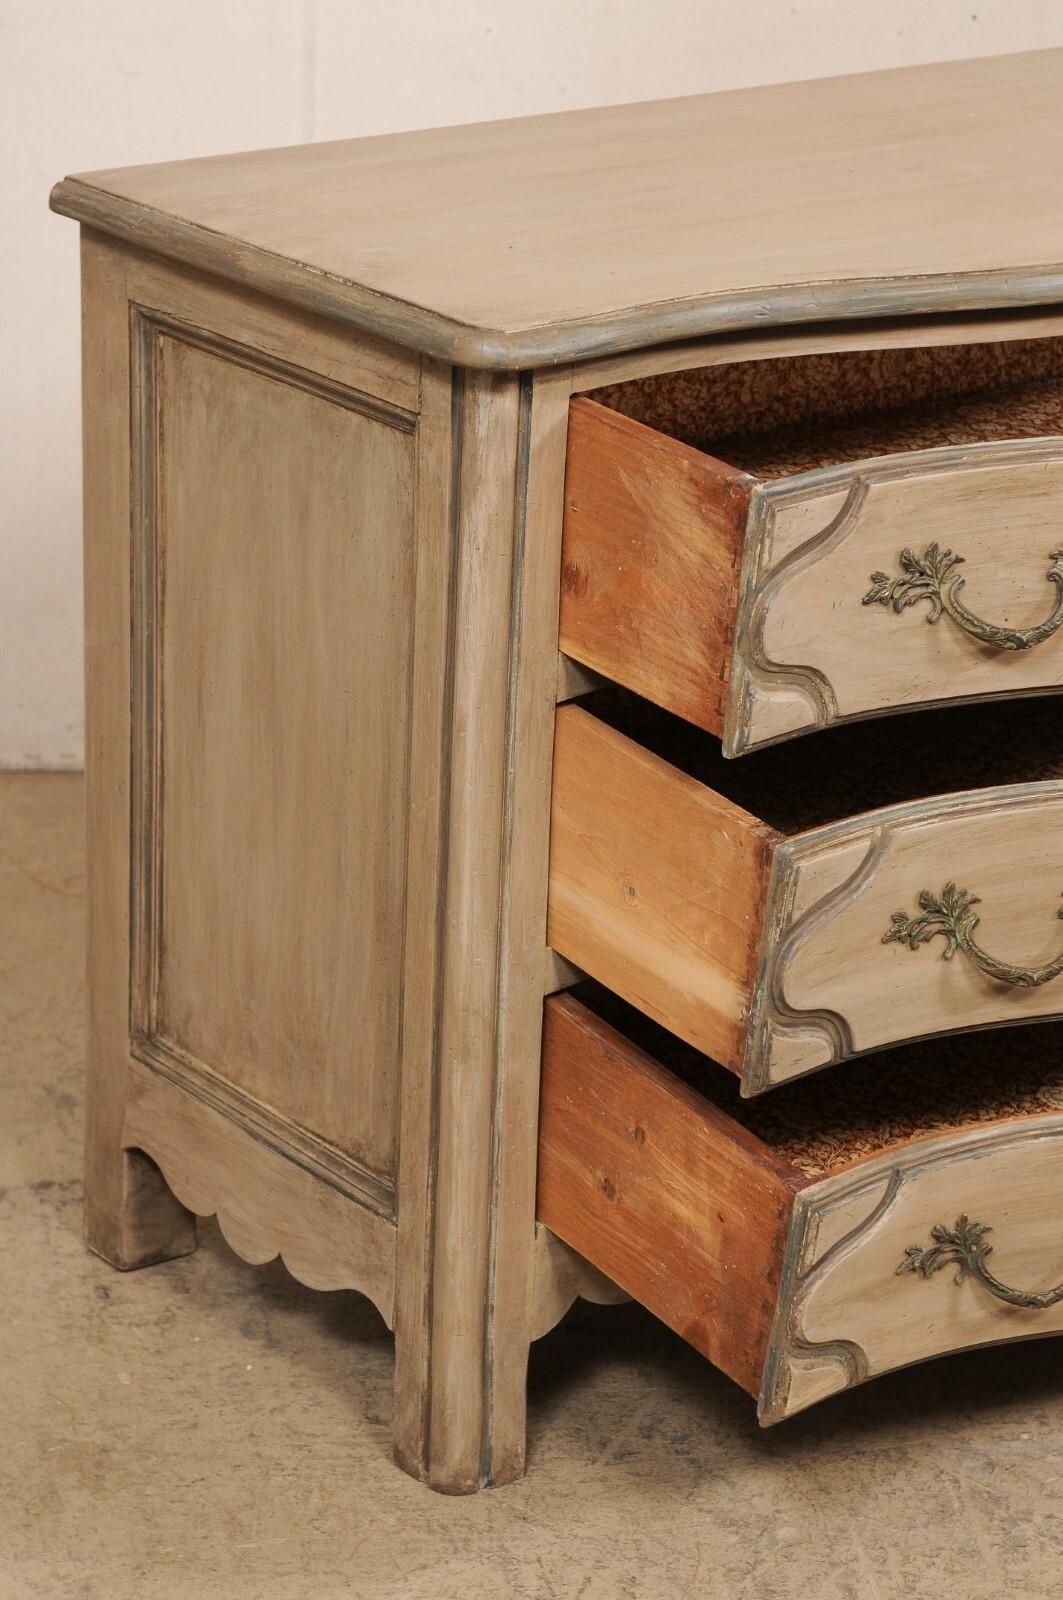 20th Century Italian Serpentine Three-Drawer Wooden Chest w/Scalloped Skirt, Mid 20th C. For Sale